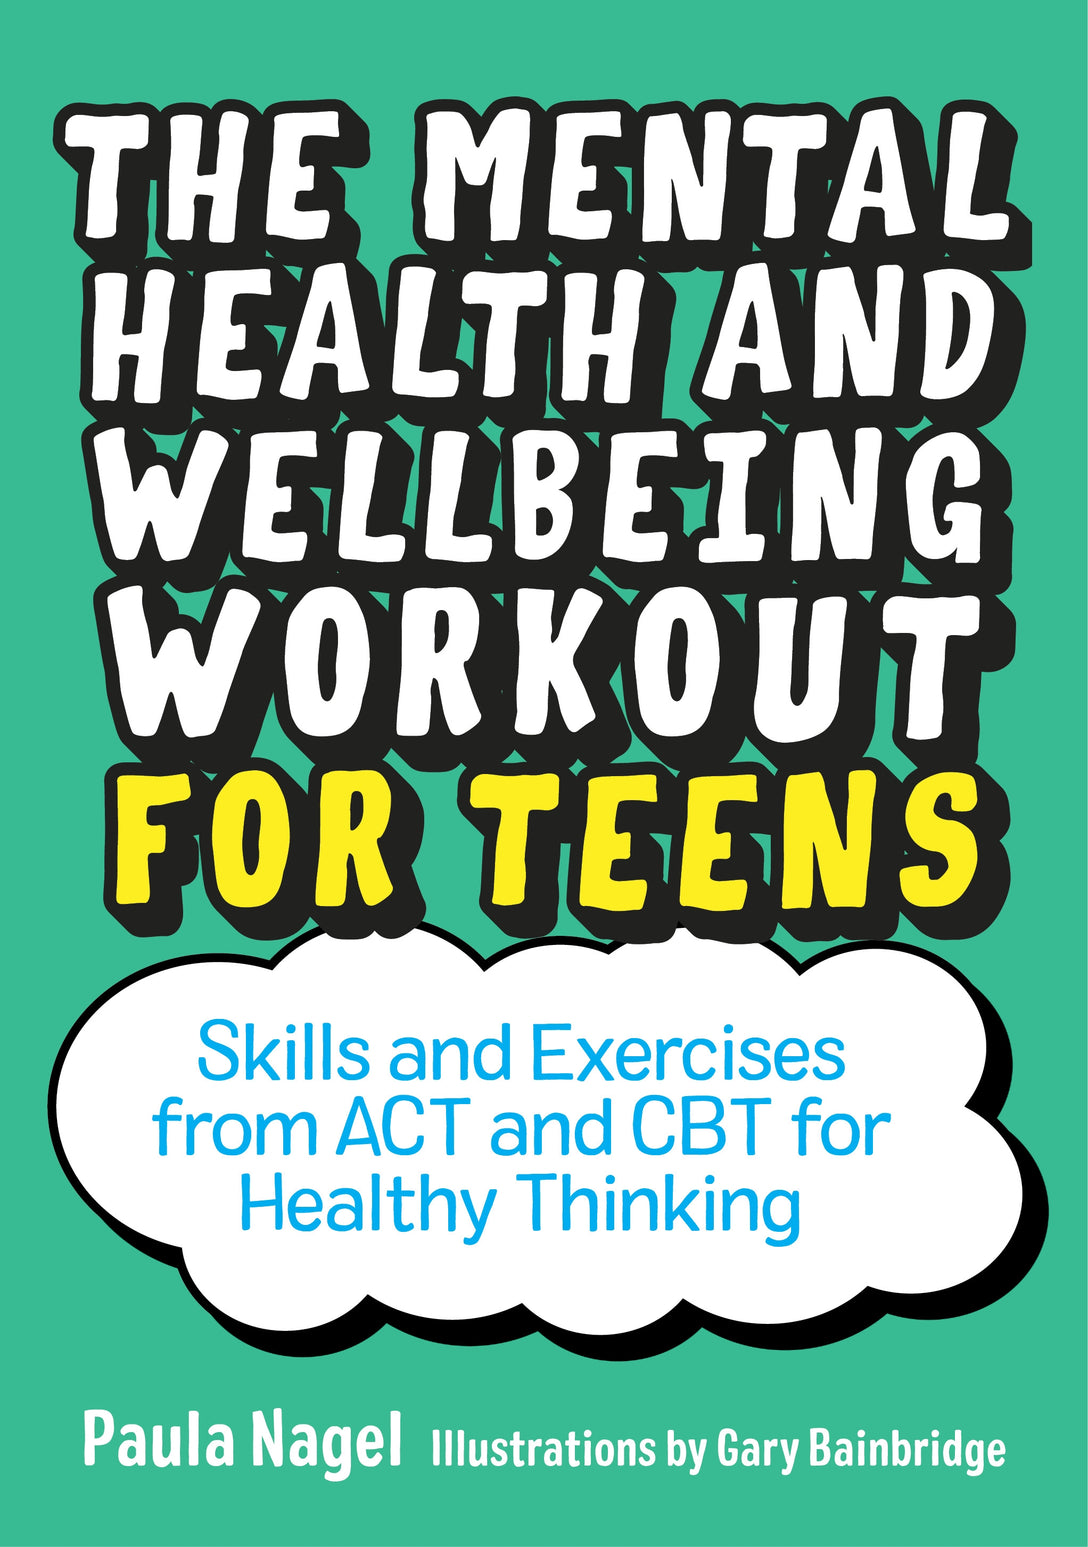 The Mental Health and Wellbeing Workout for Teens by Paula Nagel, Gary Bainbridge